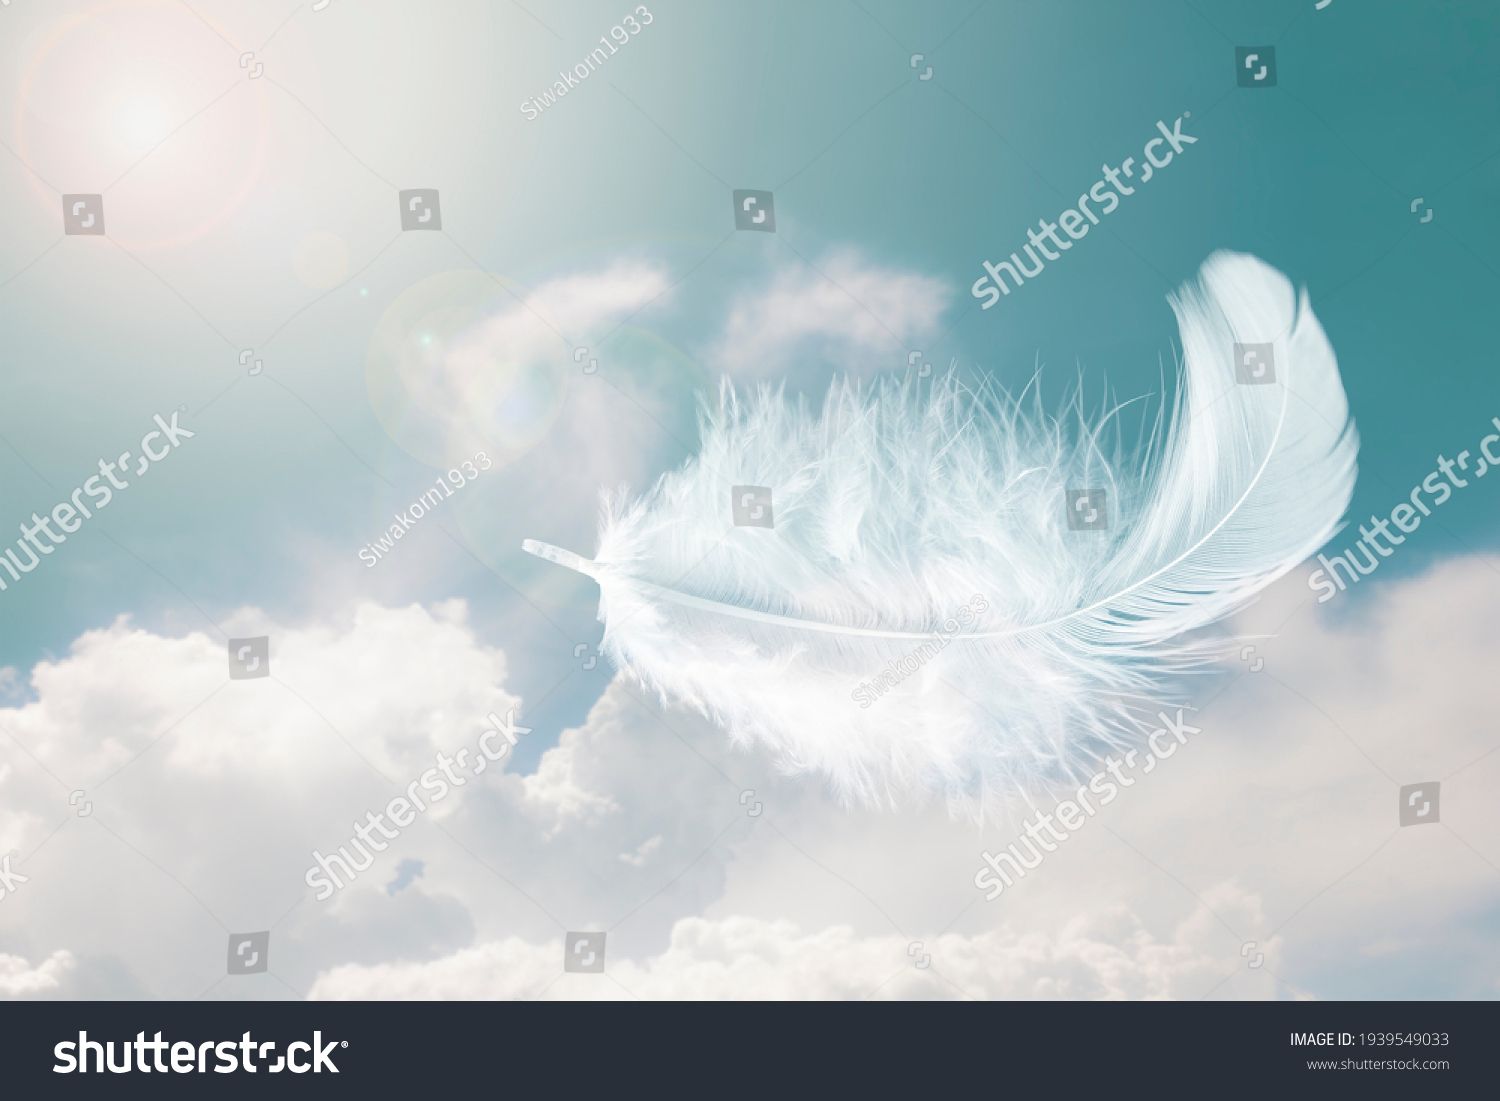 Beautiful Soft and Light White Fluffy Feathers Floating inThe Sky with Clouds. Abstract. Heavenly Dreamy Fluffy Colorful Sky. Swan Feather #1939549033